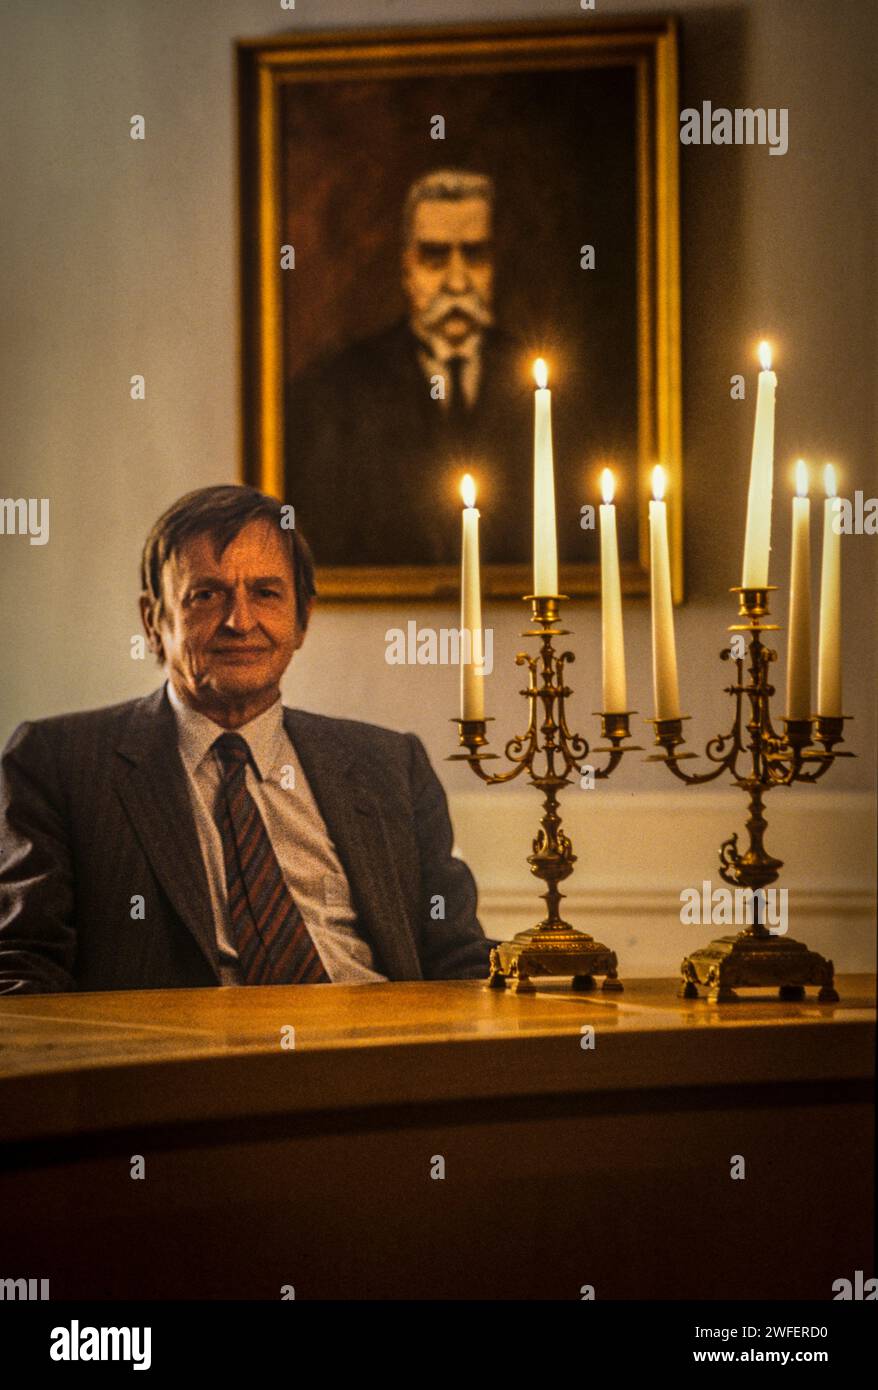 Olof Palme and Hjalmar Branting portrait in guvernement building. Candlestick holder was a gift from Hjalmar Branting to the Palme family. Stock Photo